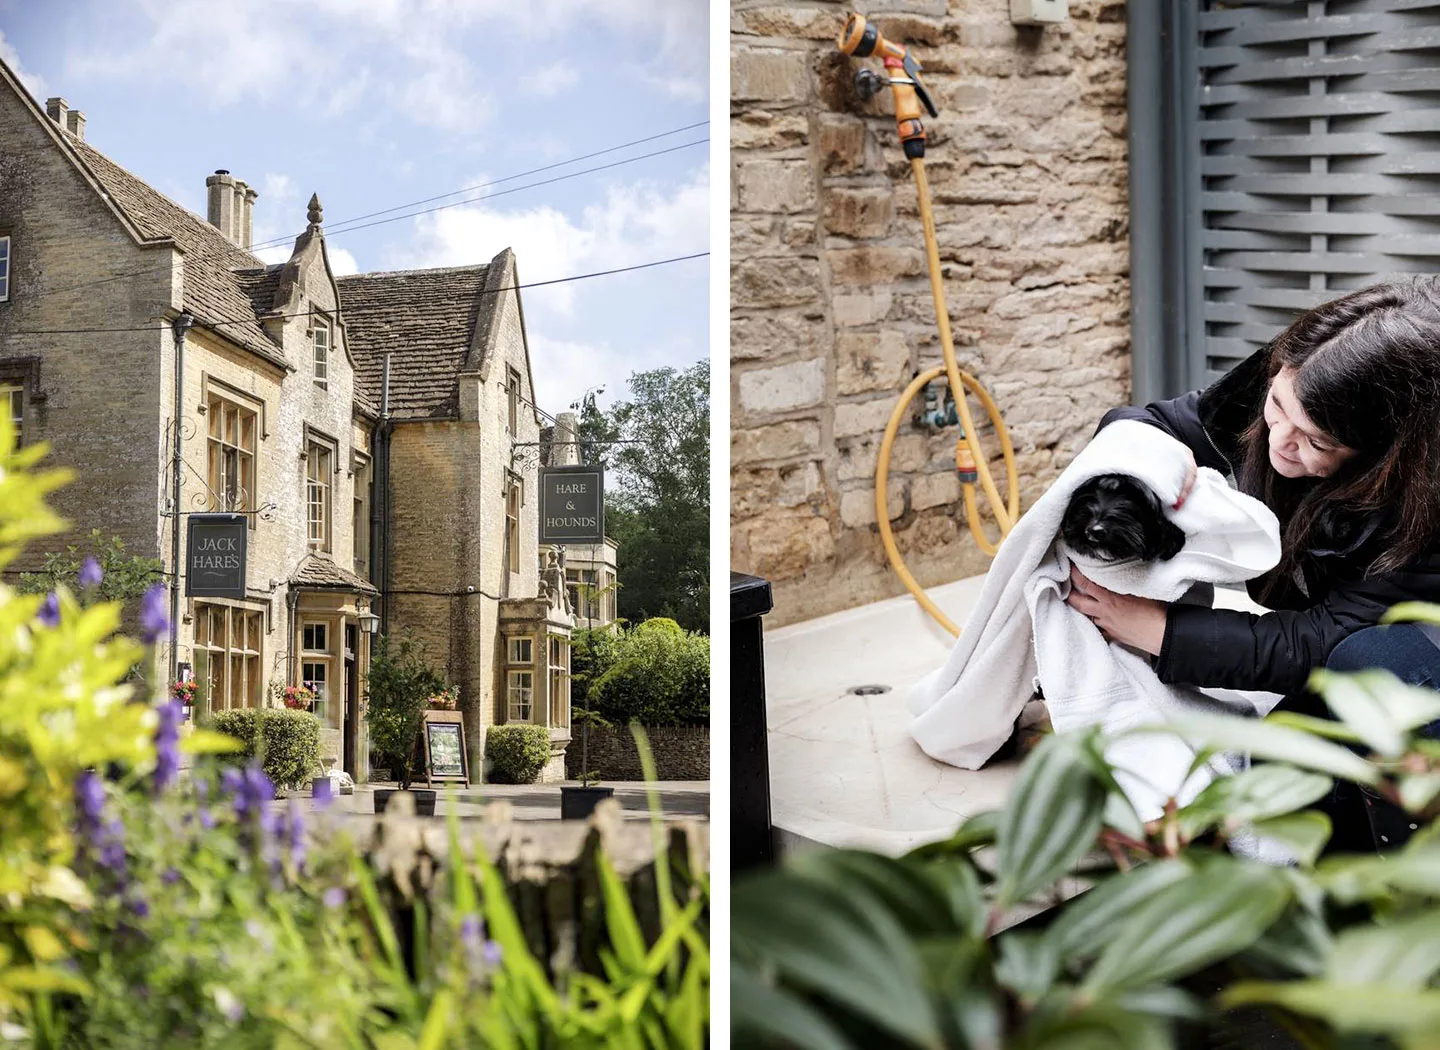 The Hare and Hounds hotel in Tetbury and their dog wash 